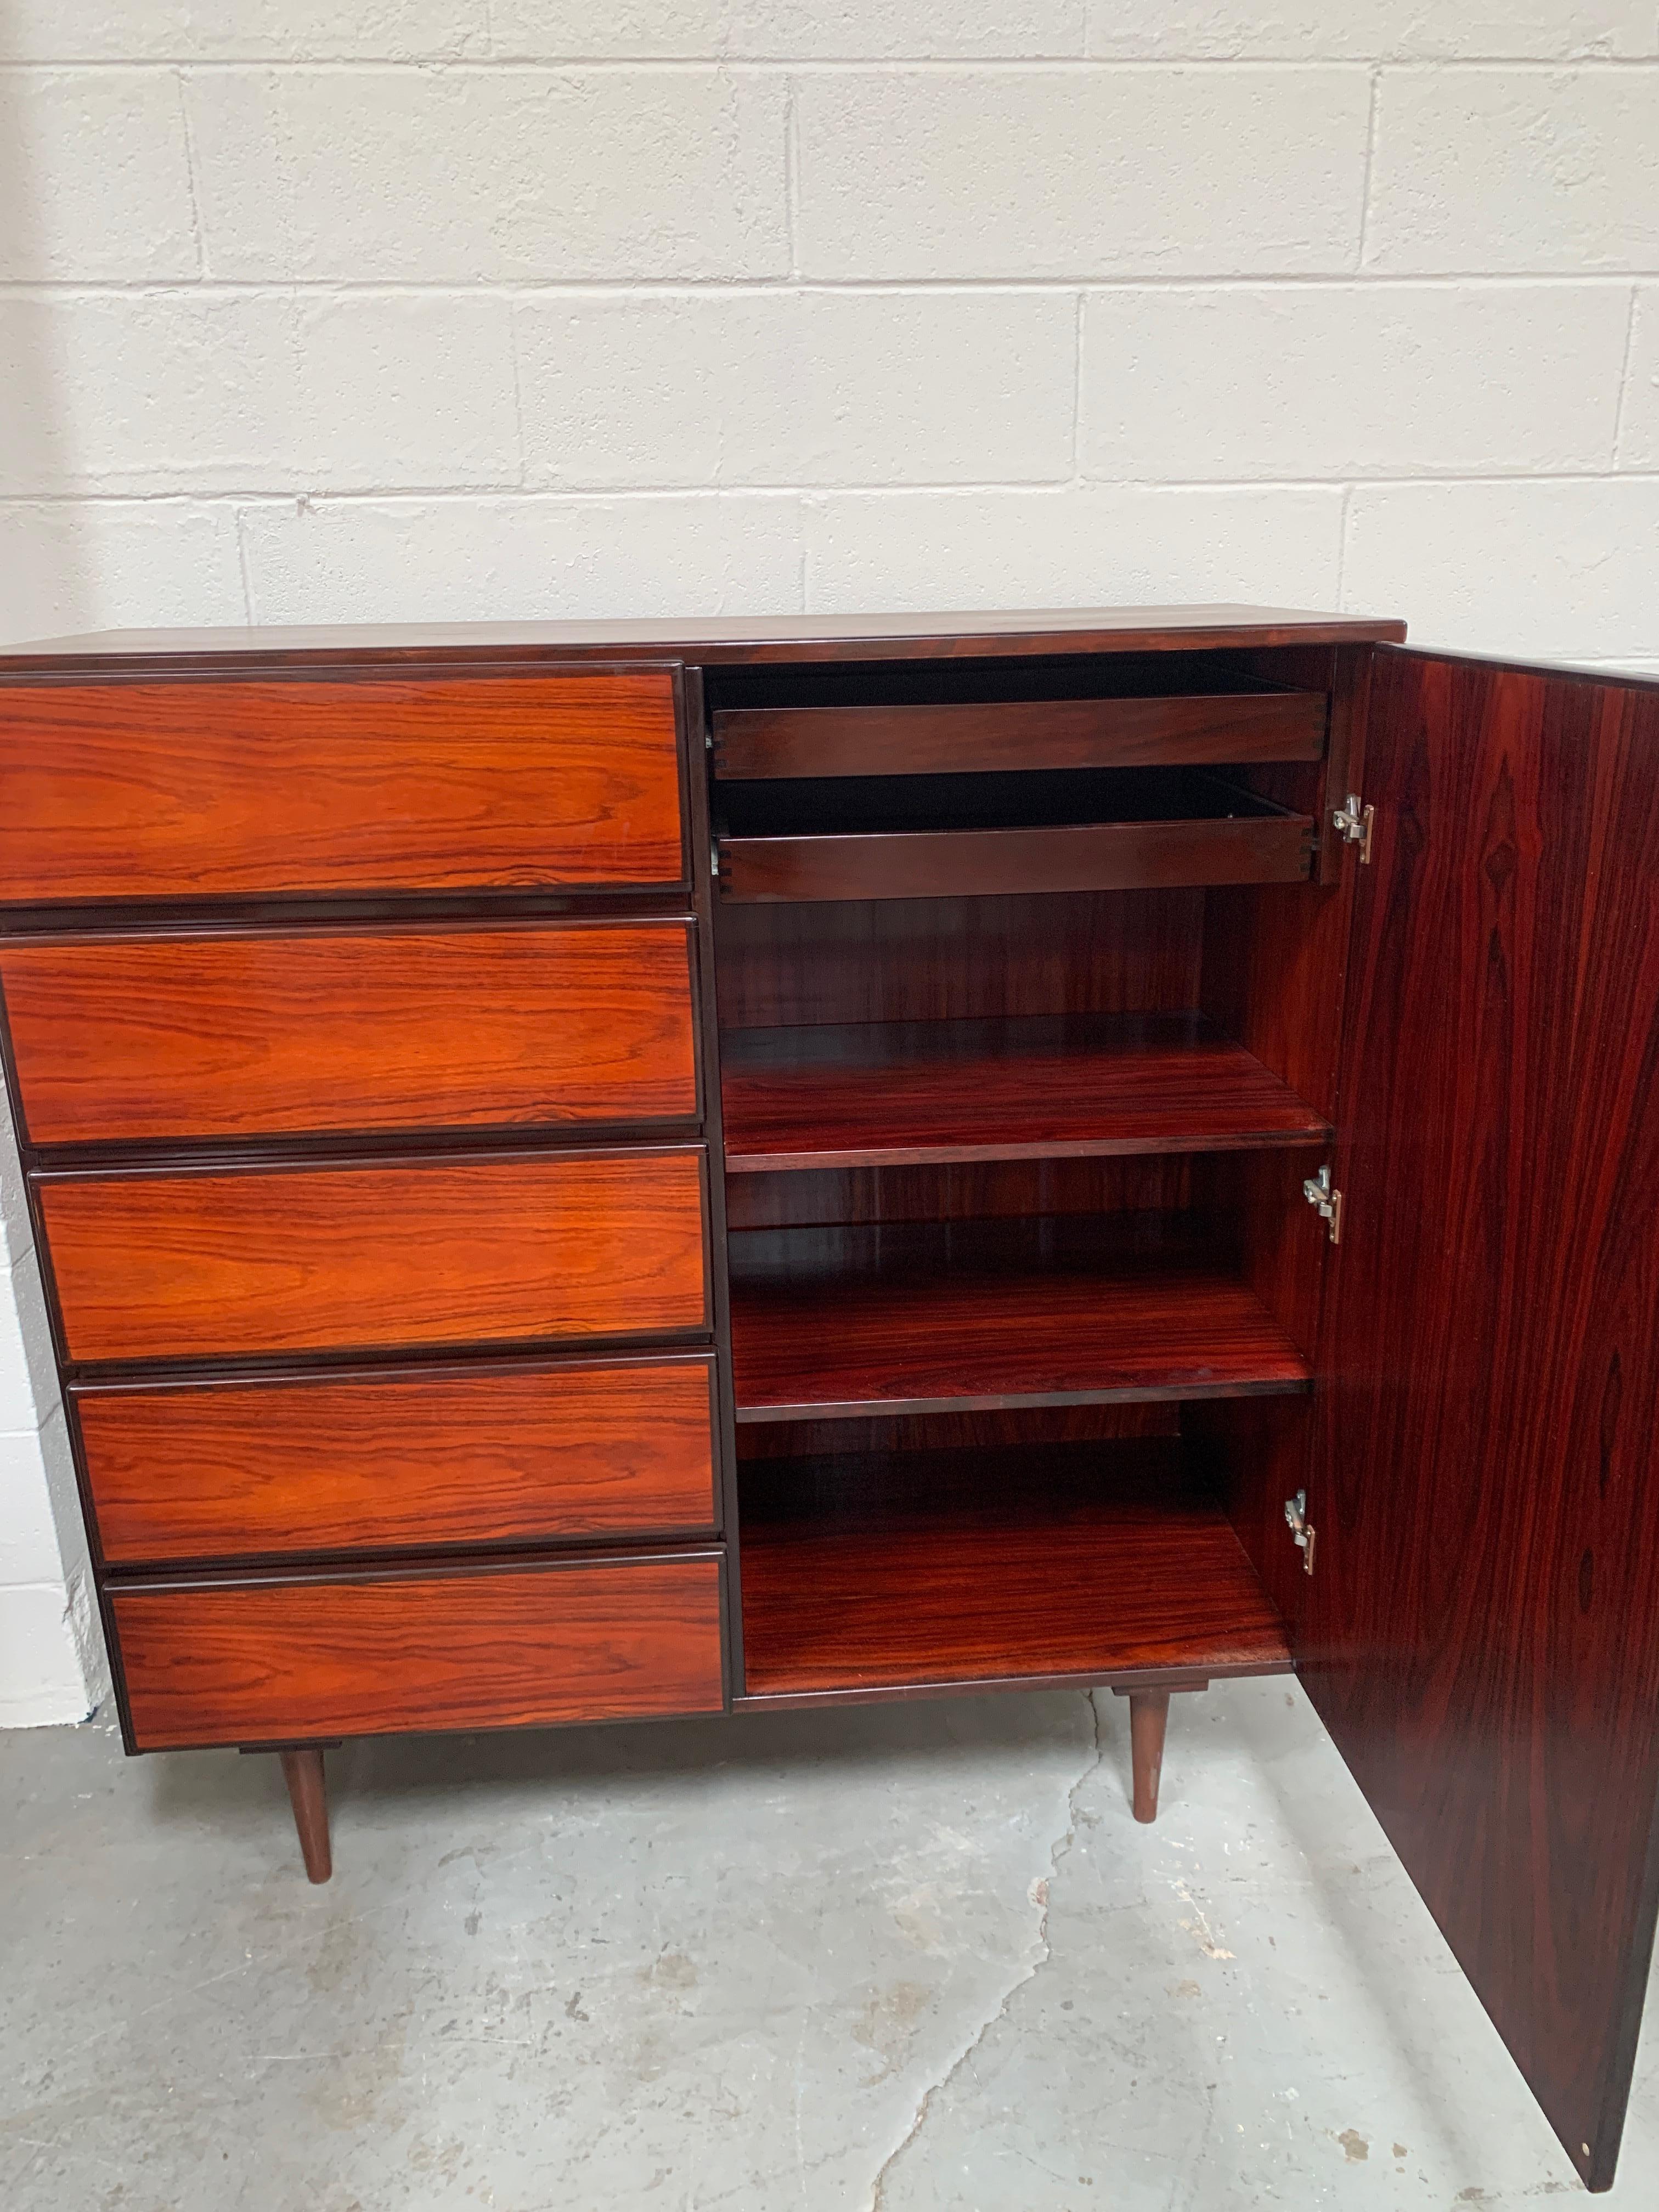 A tall wood storage cabinet stained in a deep red - signature of Scan Coll, made in Denmark. Complete with makers mark and quintessential midcentury pencil legs, this multipurpose cabinet can be used as a complement to its partner dresser or as a